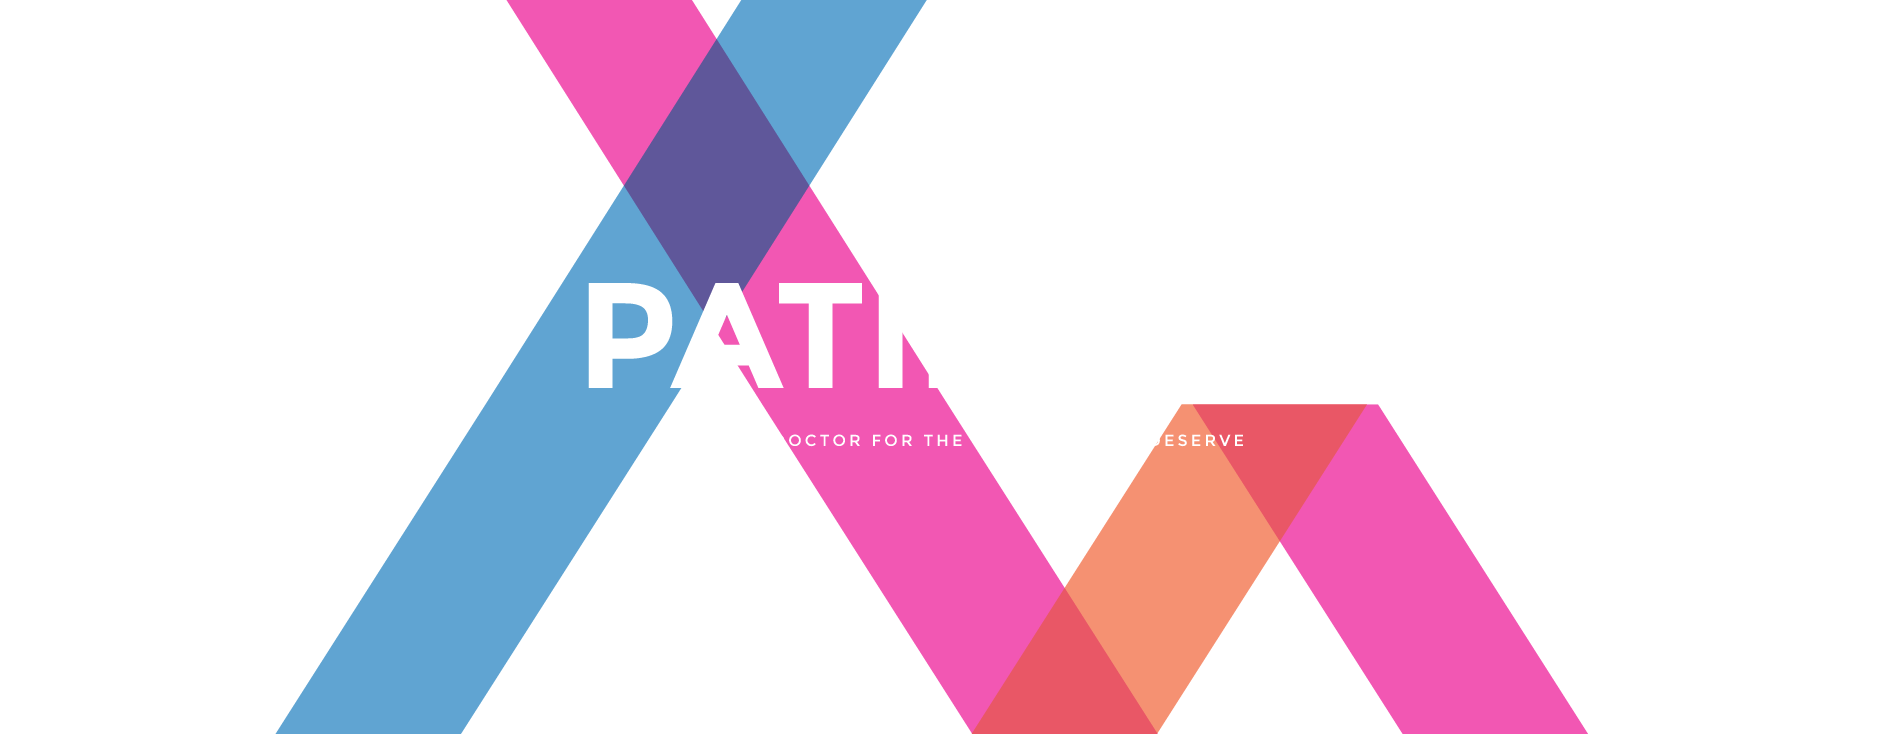 PATIENTS.  ASK YOUR DOCTOR FOR THE COMFORT YOU DESERVE